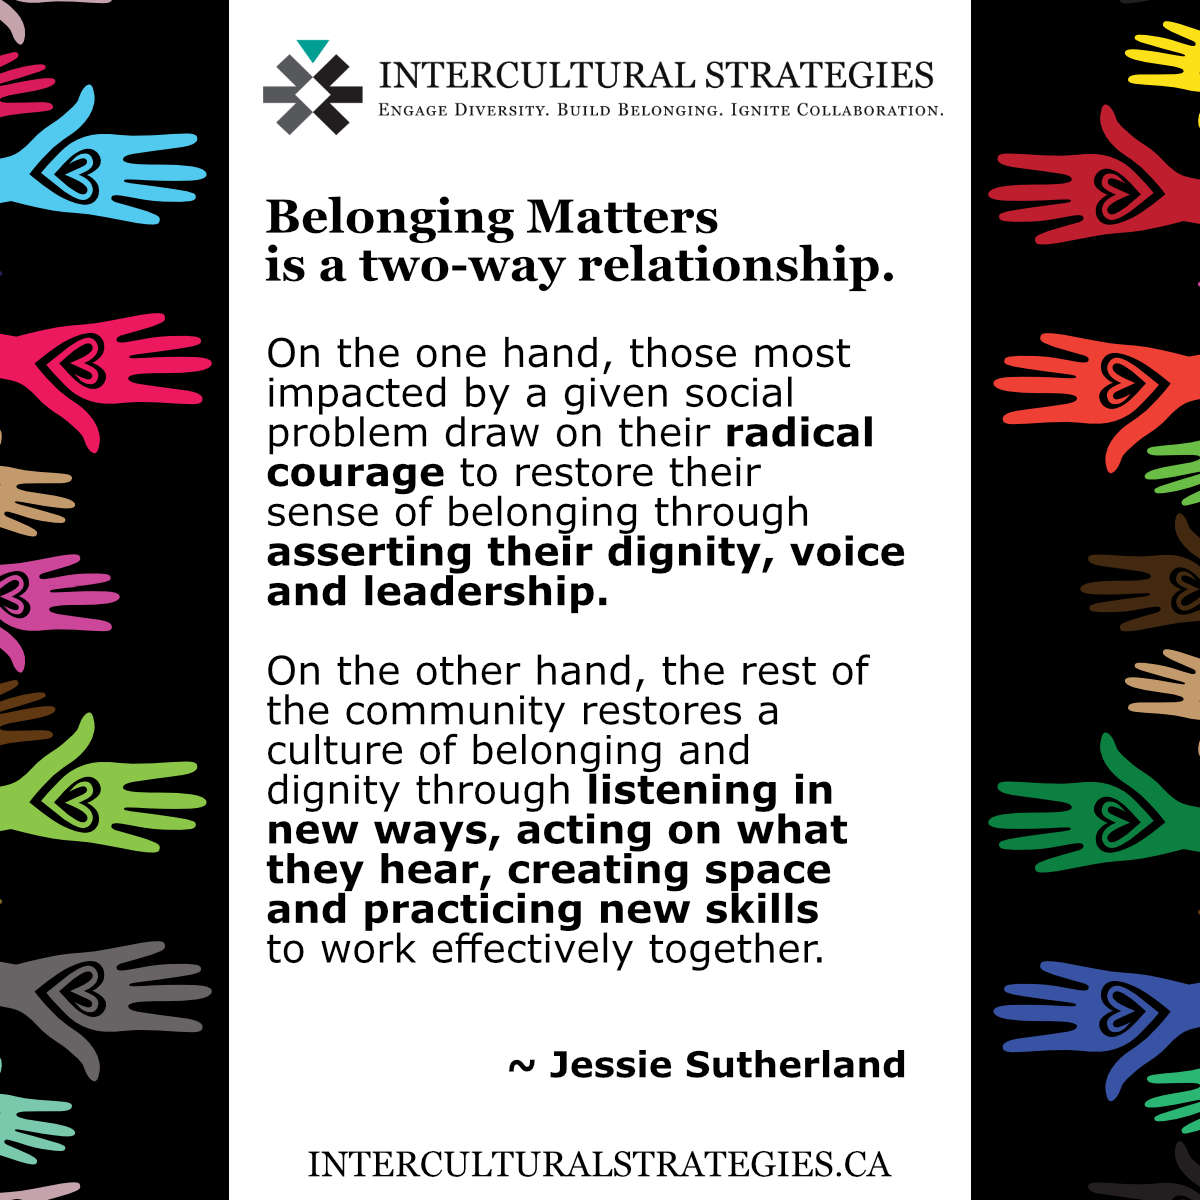 Belonging Matters is a two-way relationship